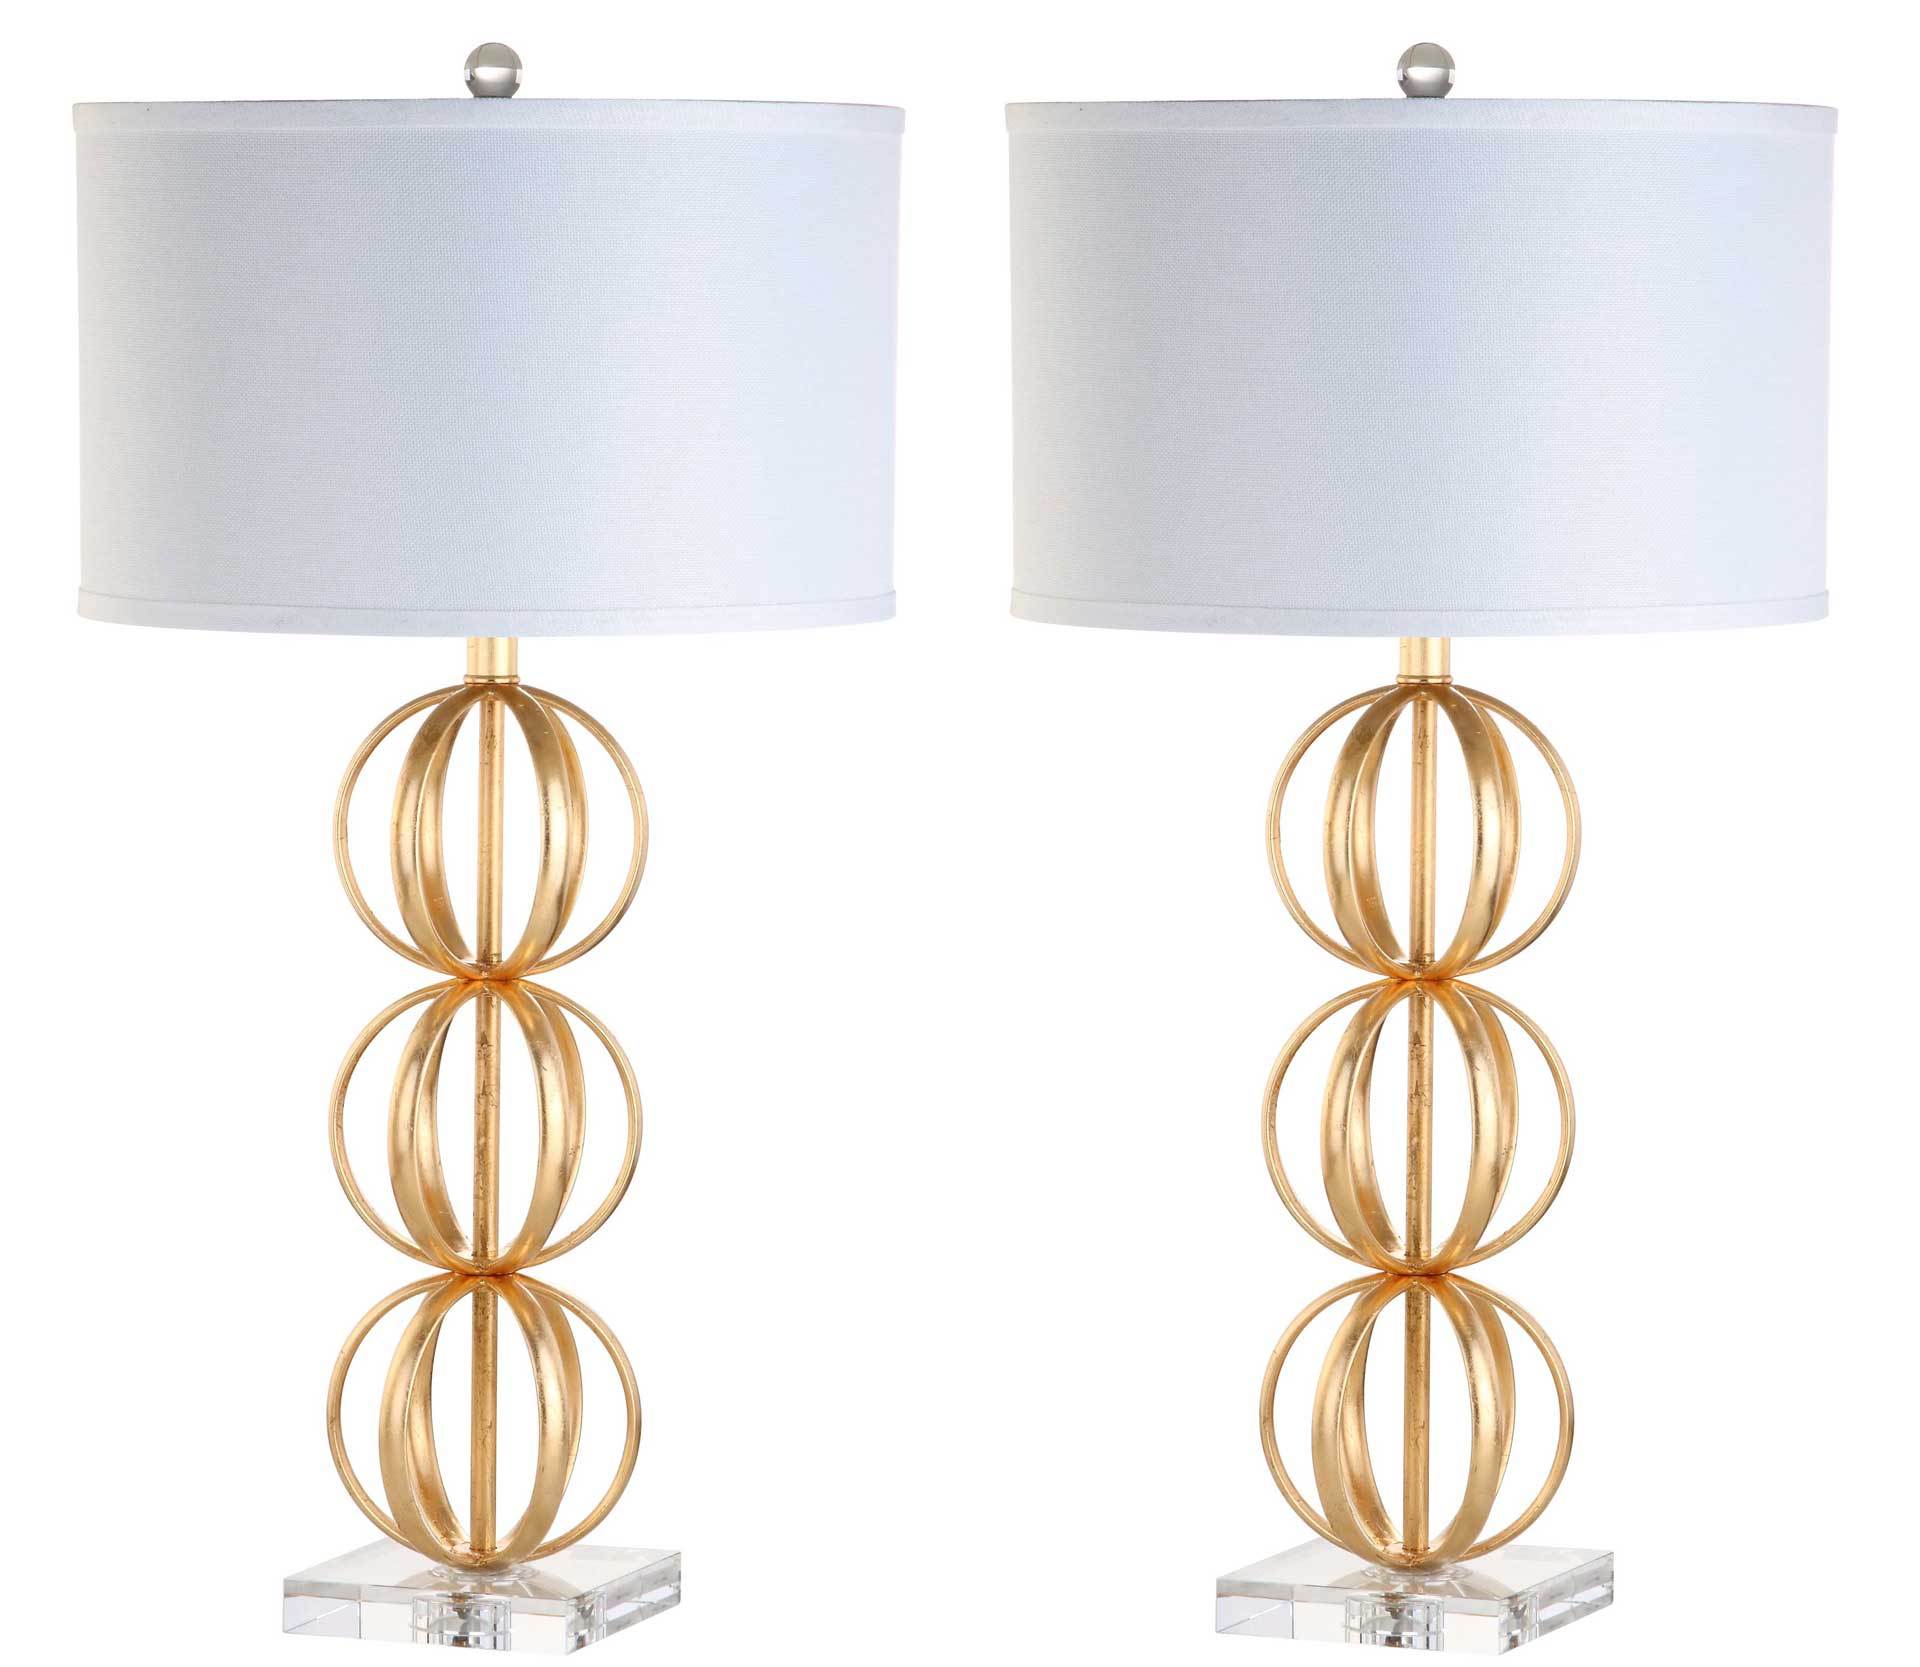 Andrew Table Lamp Brass Gold (Set of 2)